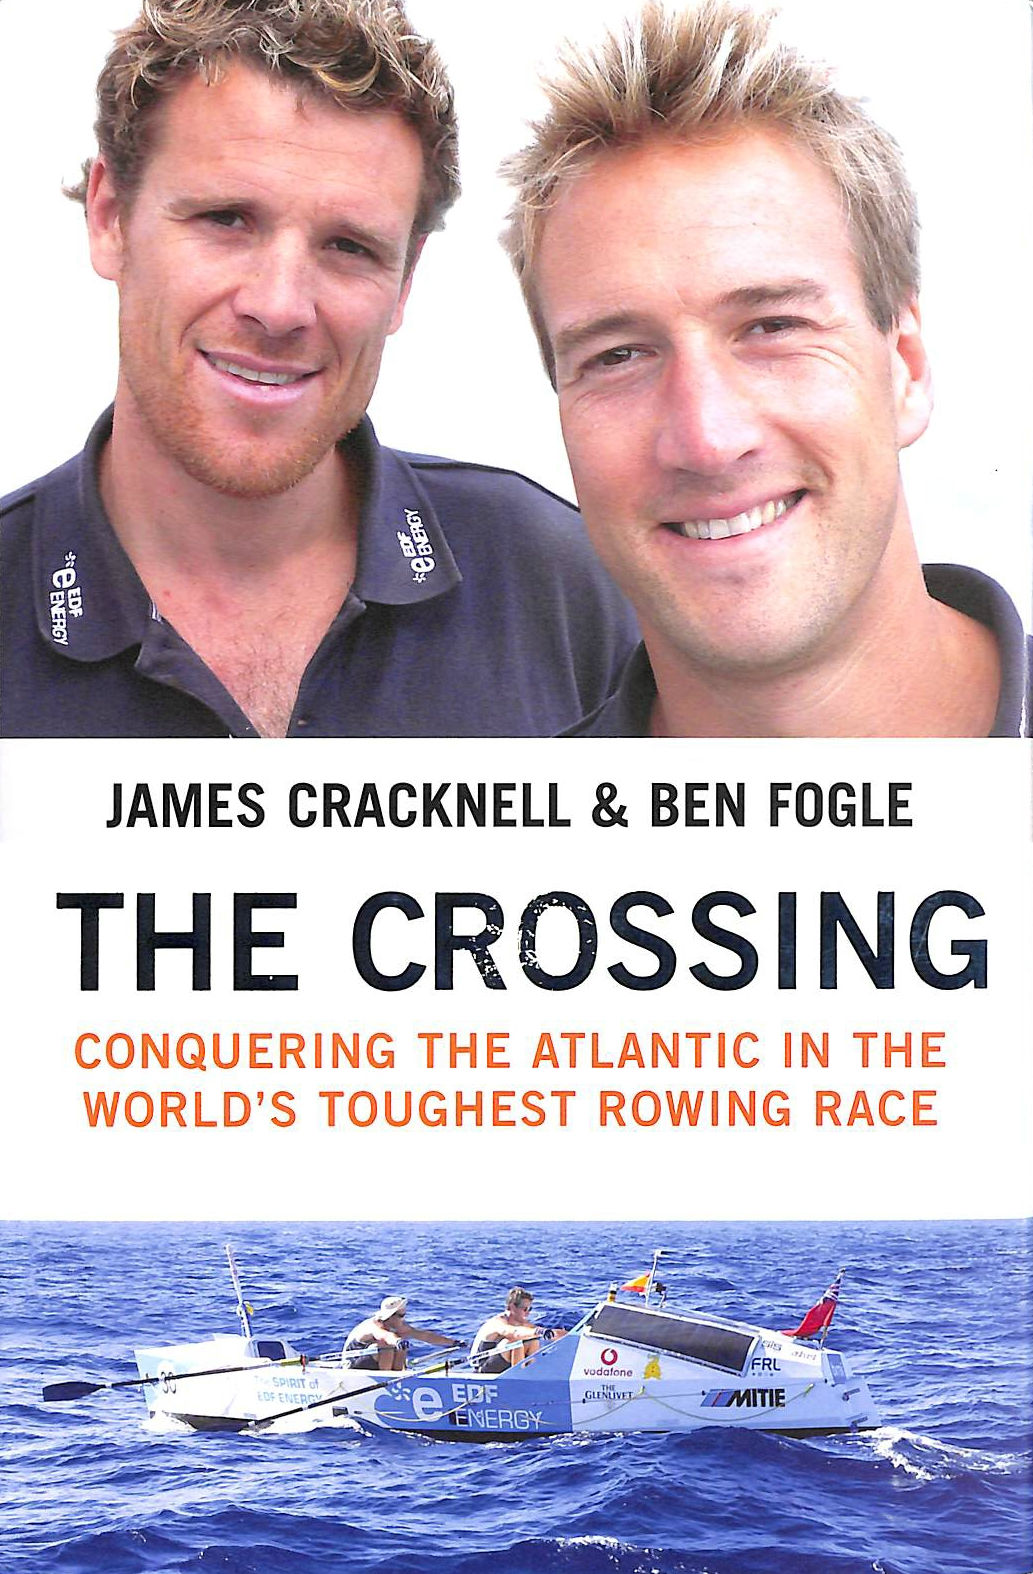 FOGLE, BEN; CRACKNELL, JAMES - The Crossing: Conquering the Atlantic in the World's Toughest Rowing Race